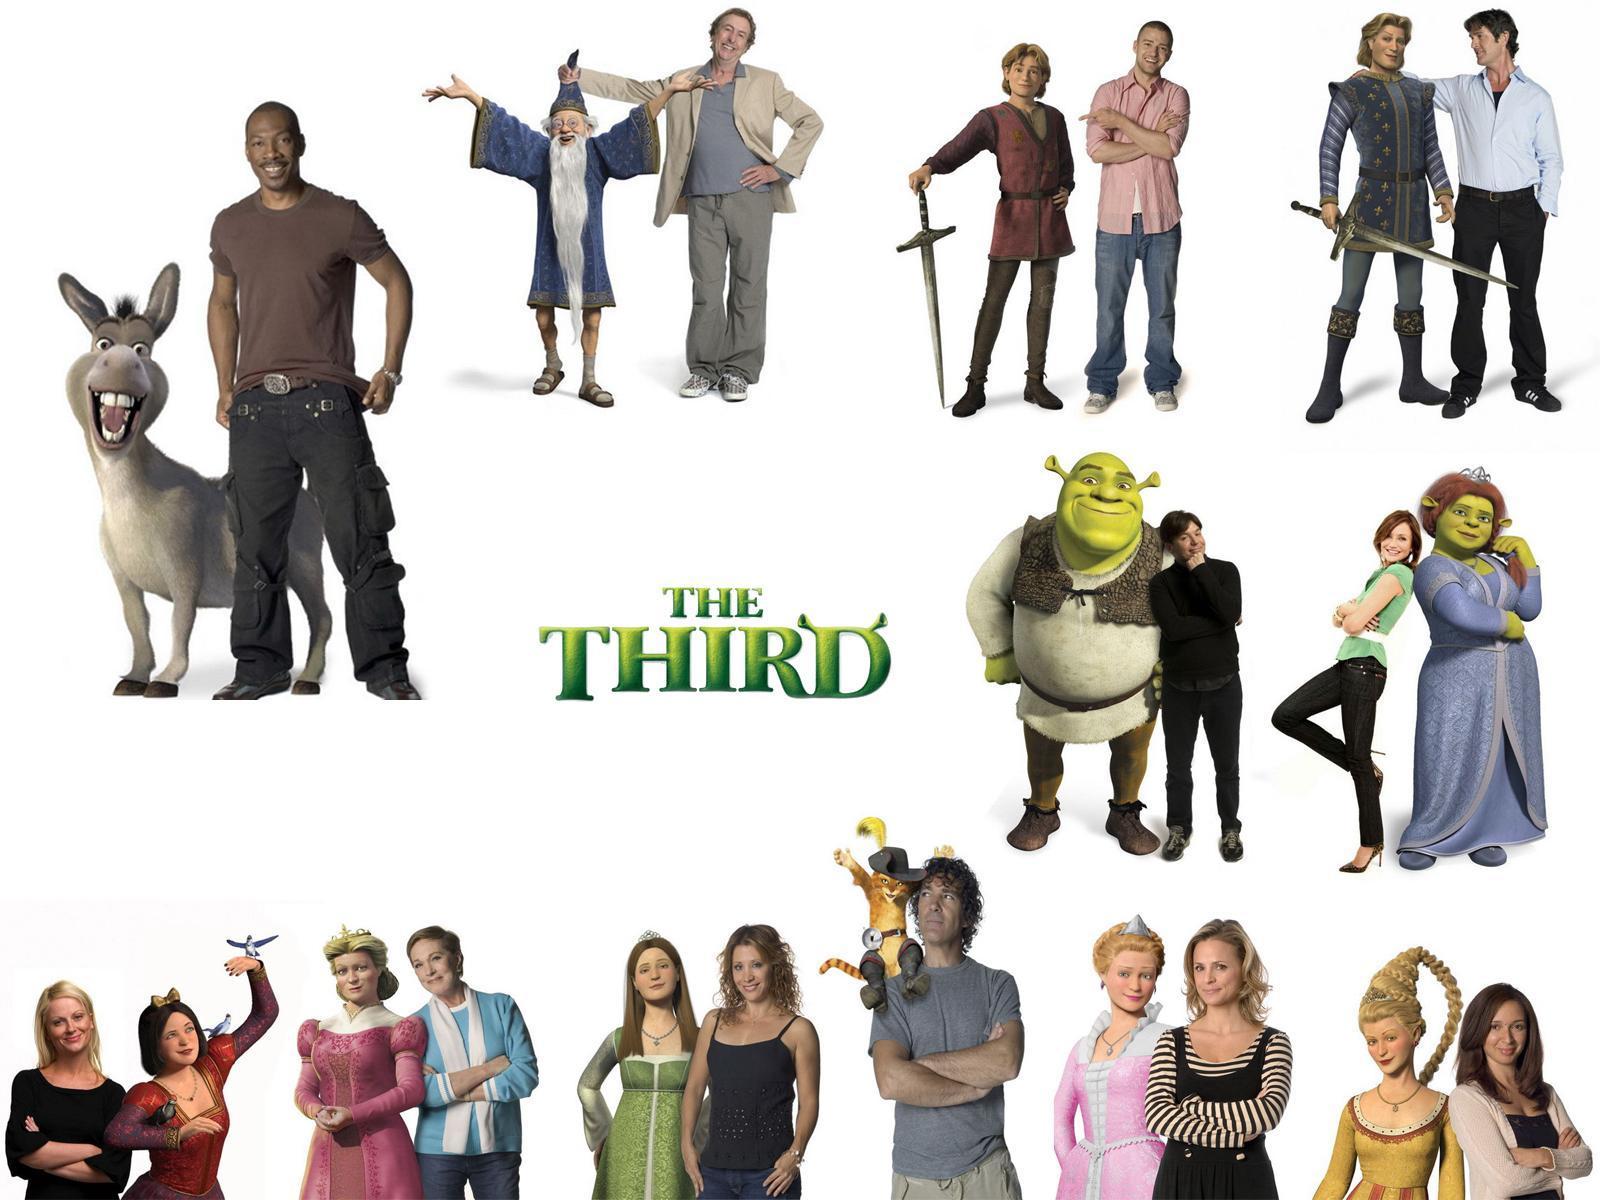 The Third is a 2004 American fantasy comedy film directed by Steven Polge - Shrek